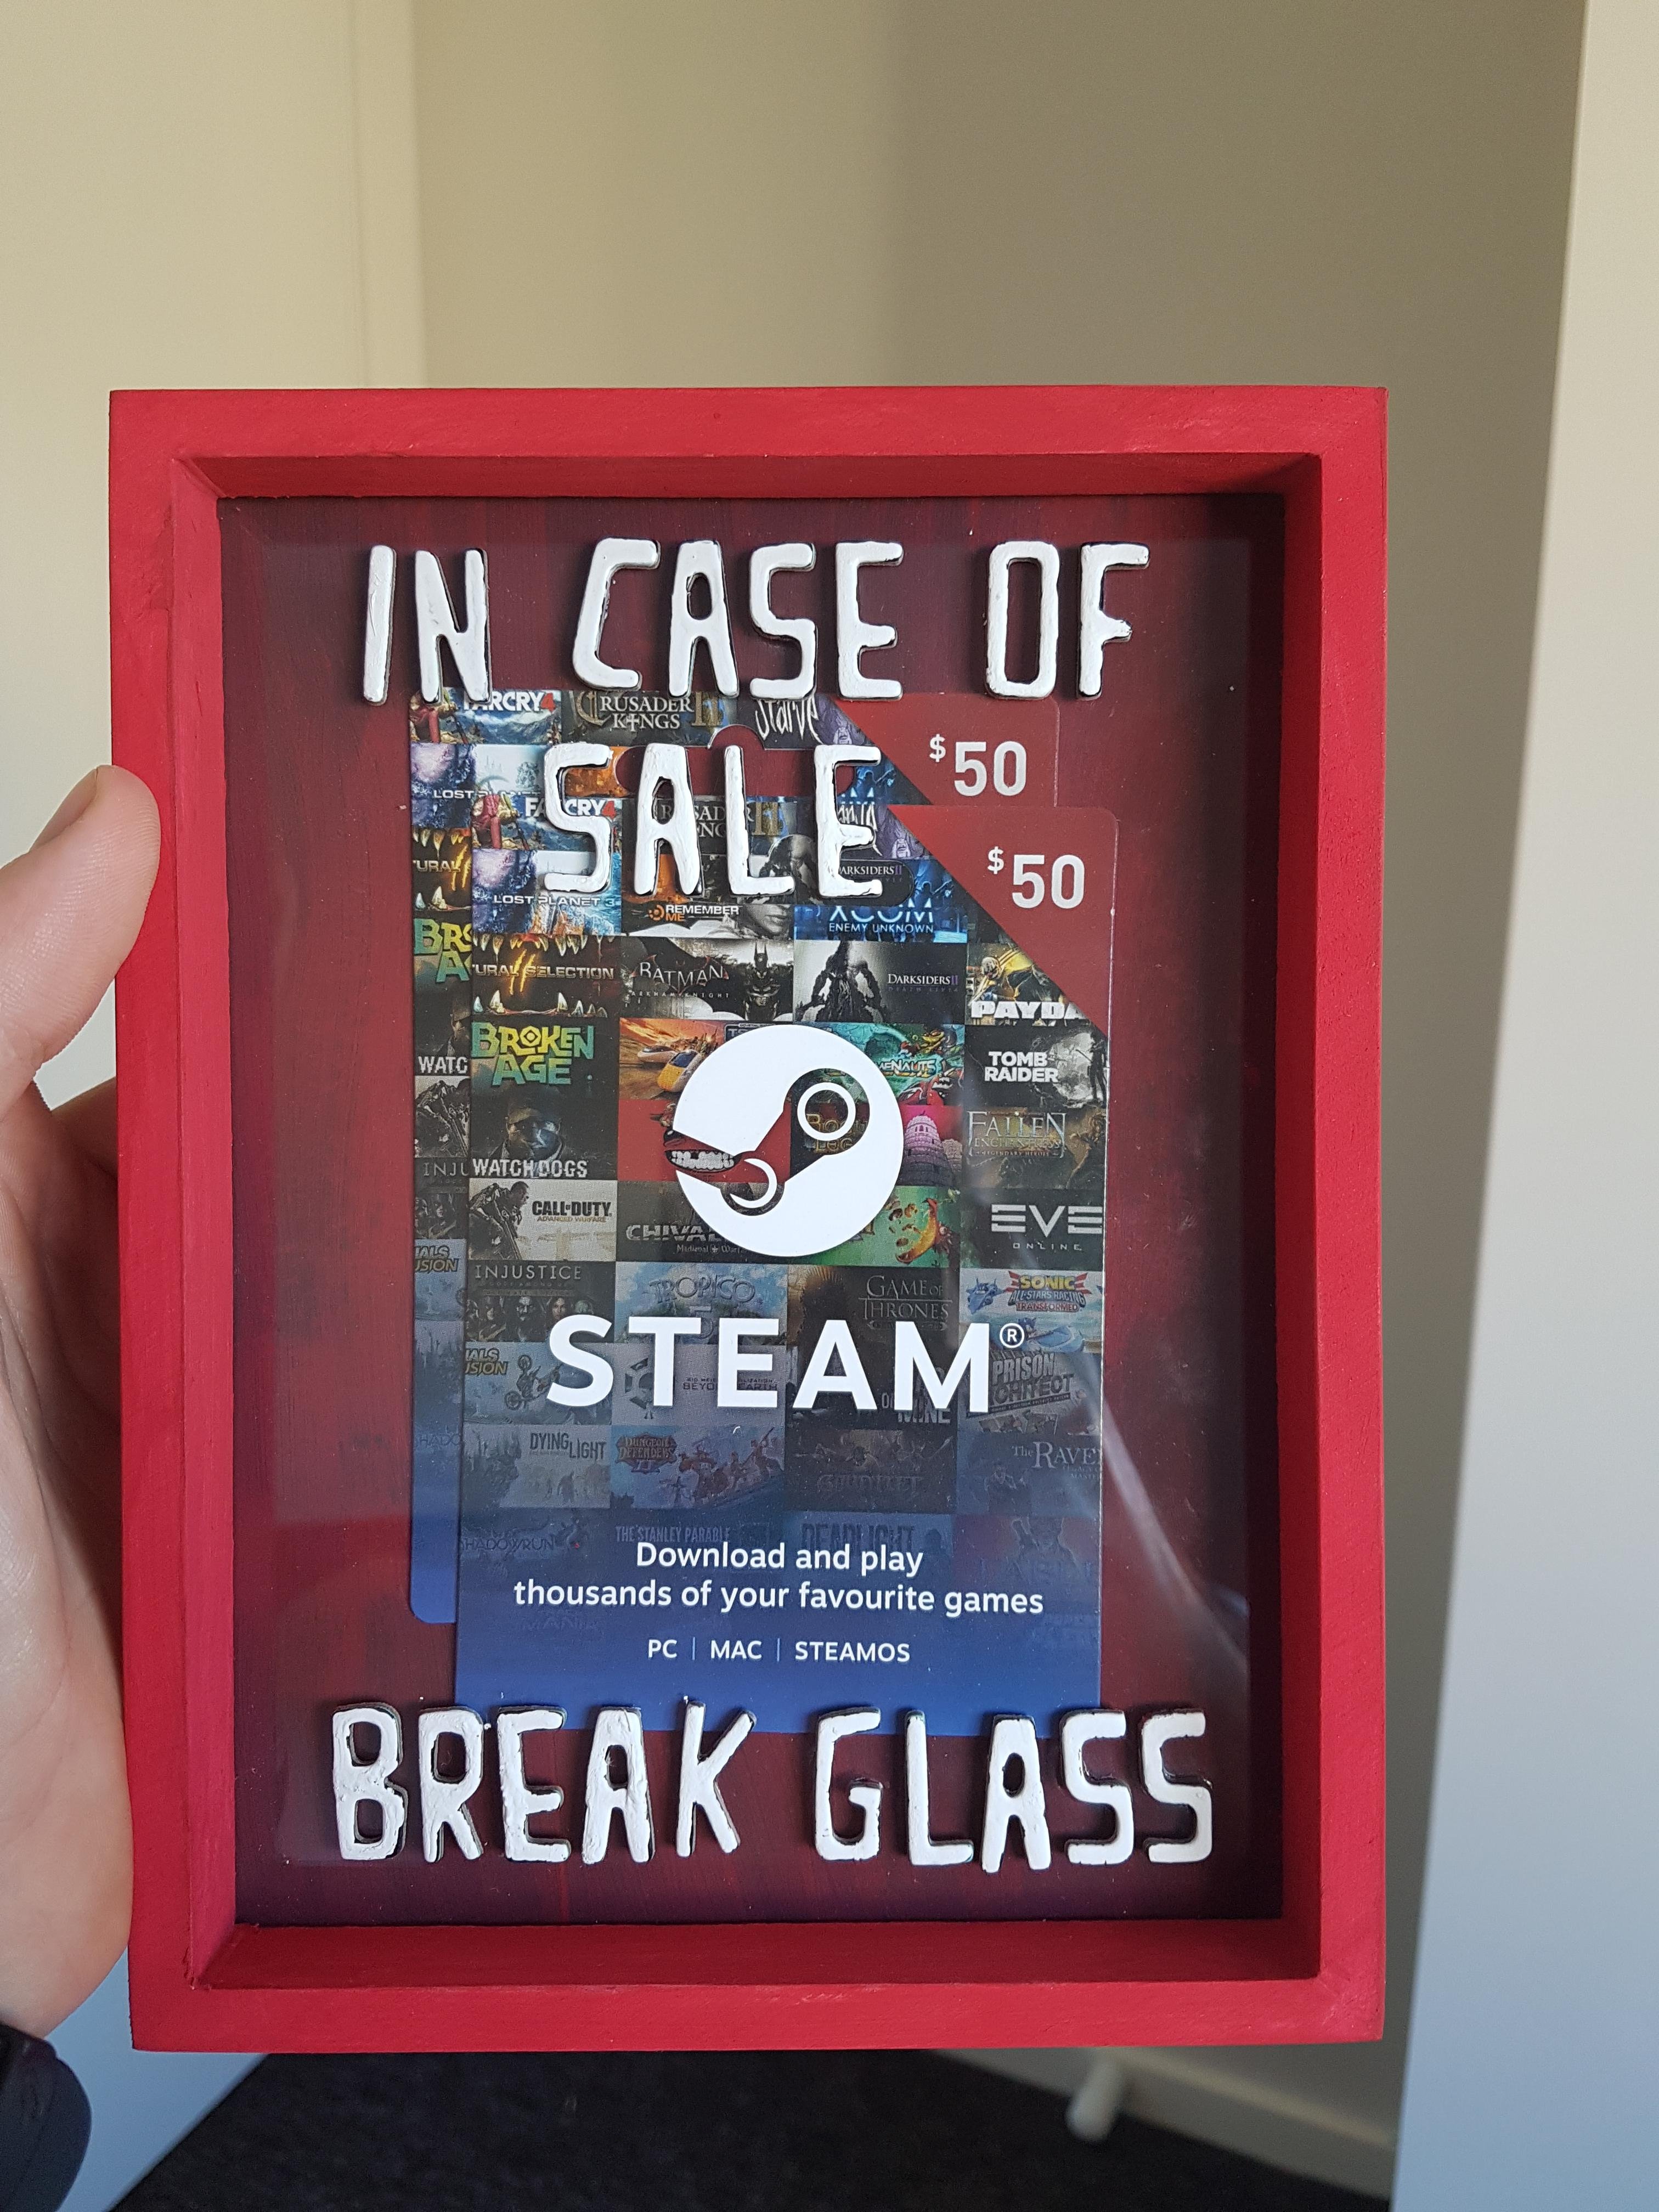 funny gaming memes - case of steam sale break glass - In Case Of 50 Sale 50 Steam Download and play thousands of your favourite games Rc Mac Steamos Break Glass